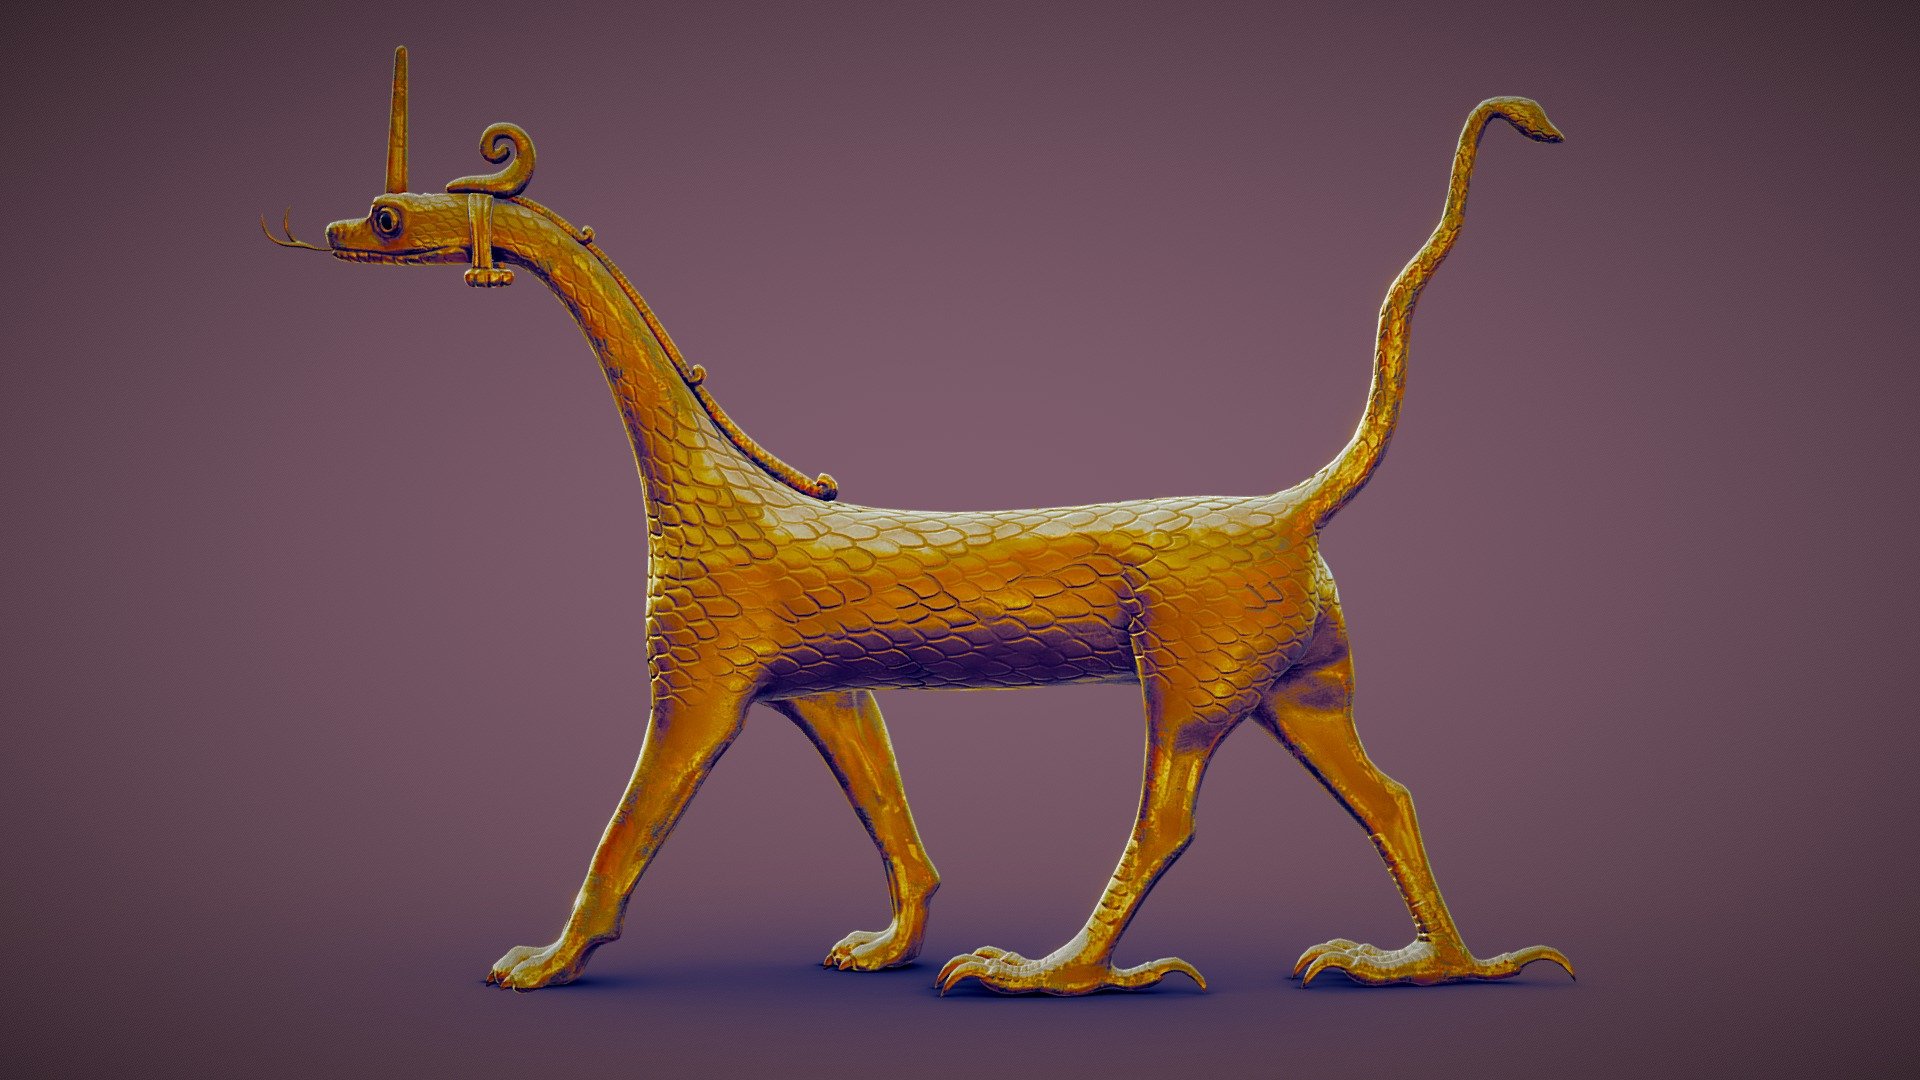 The mušḫuššu (𒈲𒄭𒄊; formerly also read as sirrušu or sirrush) or mushkhushshu (pronounced [muʃxuʃʃu] or [musxussu]), is a creature from ancient Mesopotamian mythology. A mythological hybrid, it is a scaly animal with hind legs resembling the talons of an eagle, lion-like forelimbs, a long neck and tail, a horned head, a snake-like tongue, and a crest. The mušḫuššu most famously appears on the reconstructed Ishtar Gate of the city of Babylon, dating to the sixth century BCE.

The form mušḫuššu is the Akkadian nominative of Sumerian: 𒈲𒄭𒄊 MUŠ.ḪUS, &lsquo;reddish snake', sometimes also translated as &lsquo;fierce snake'.[2] One author,[3] possibly following others, translates it as &lsquo;splendor serpent' (𒈲 MUŠ is the Sumerian term for &lsquo;serpent'). The reading sir-ruššu is due to a mistransliteration of the cuneiform in early Assyriology.[4] - Sirrush - Buy Royalty Free 3D model by Eugene Korolev (@eugene.korolev) 3d model